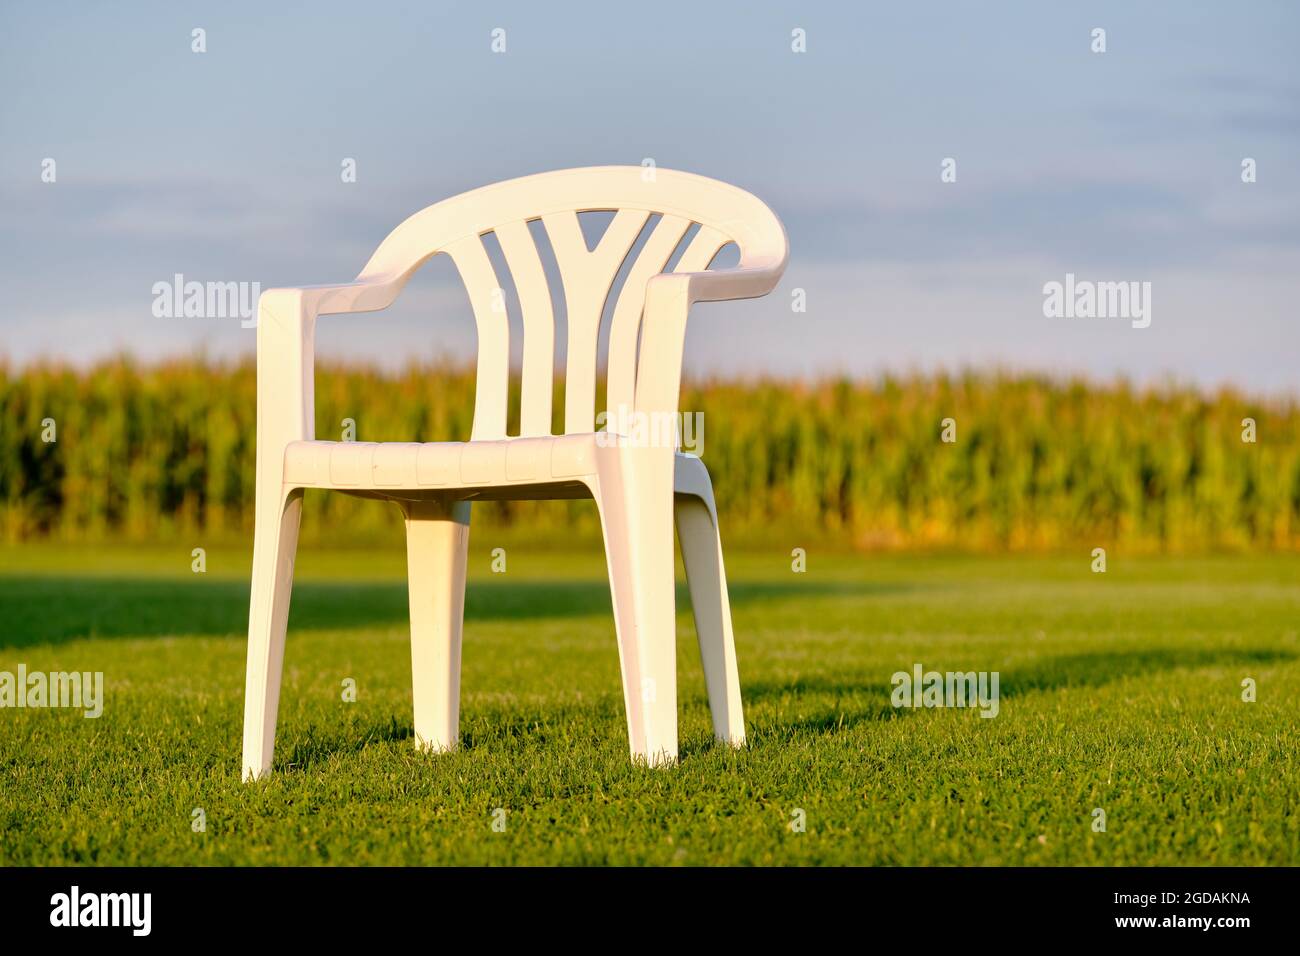 Empy white plastic garden chair standing on a green lawn in front of a cornfield in evening light. Seen in Bavaria, Germany in August. Stock Photo